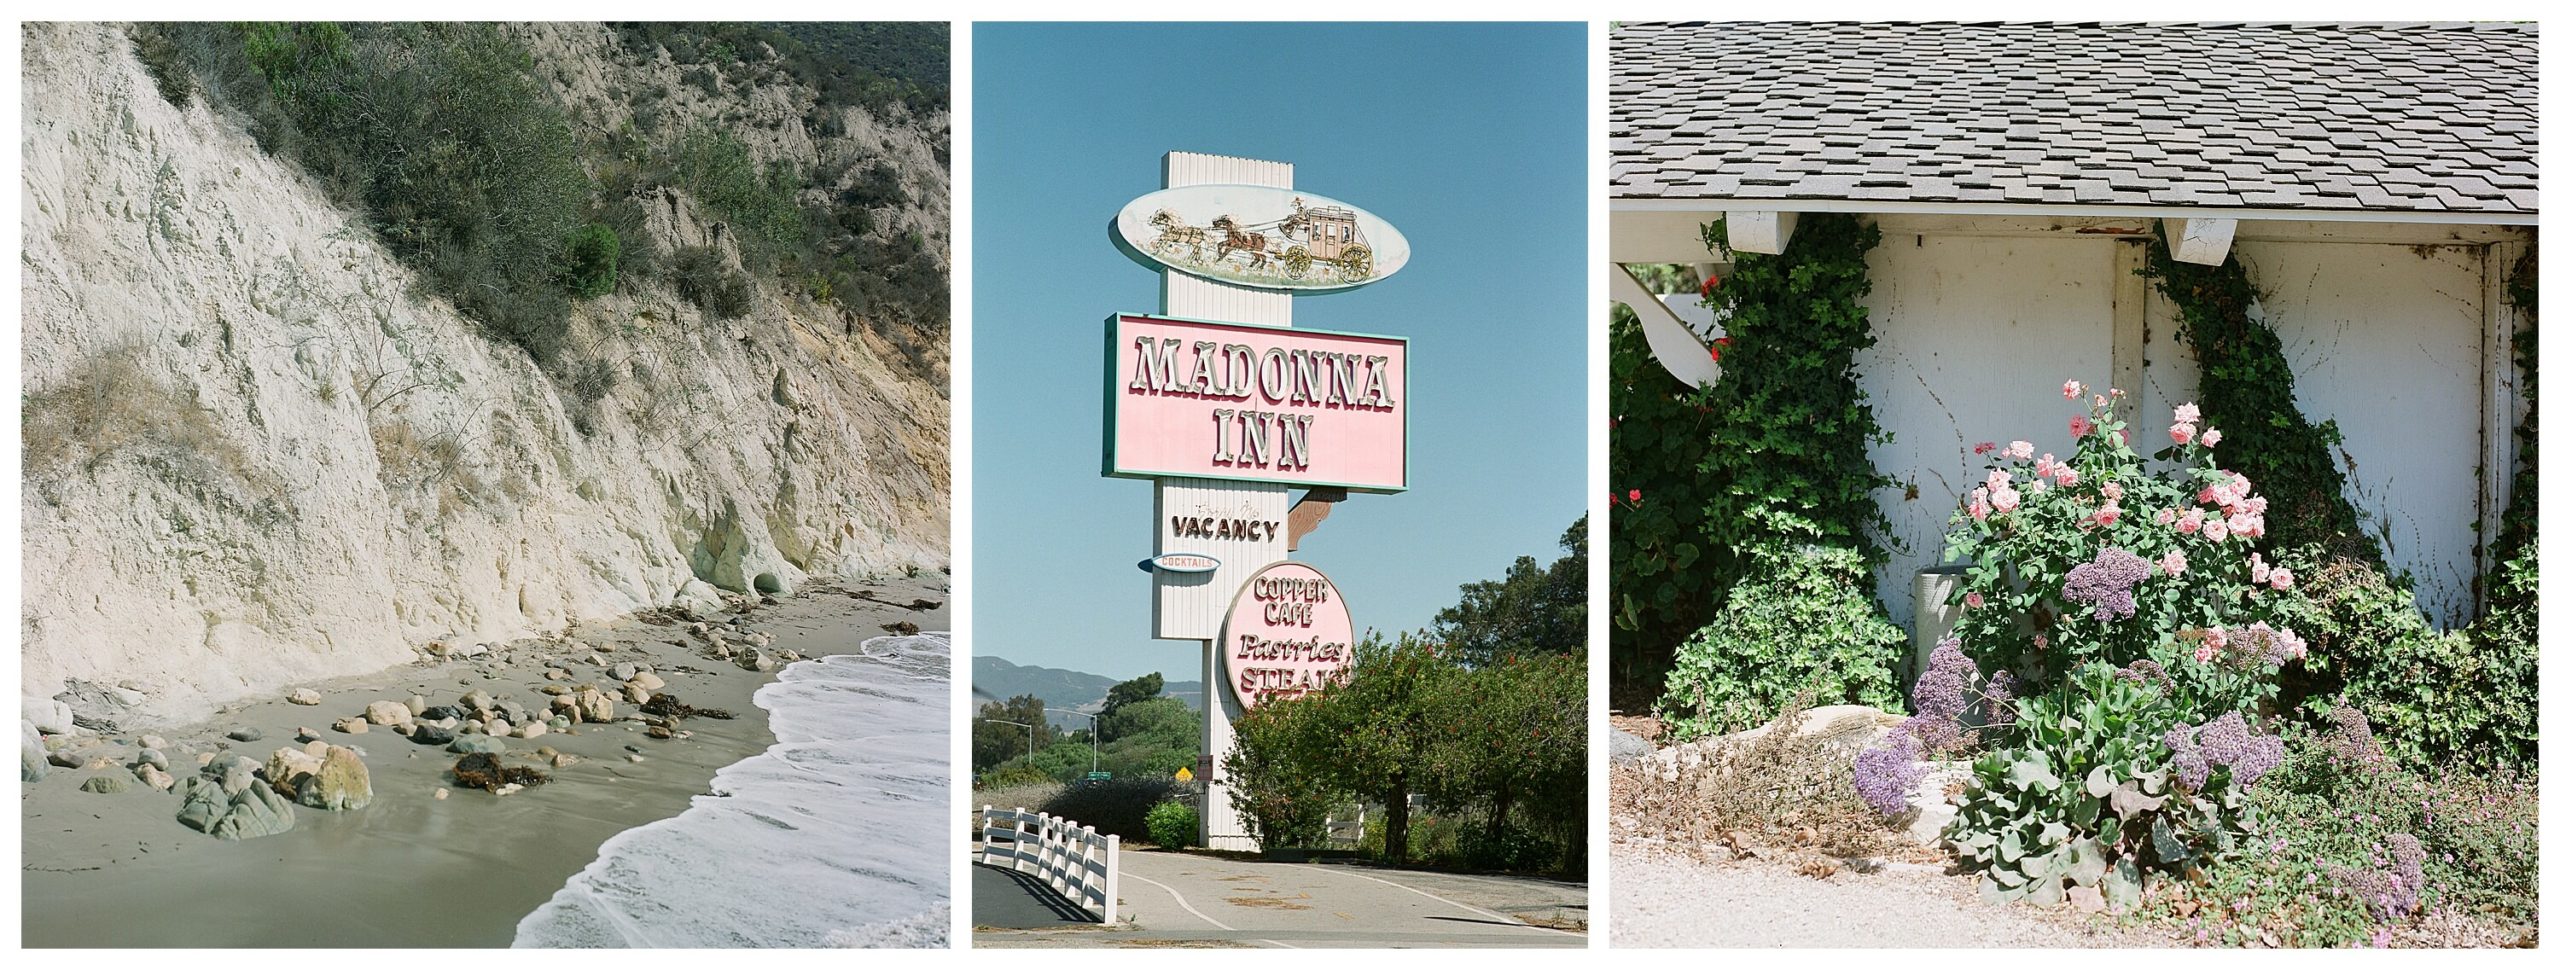 Things to do in San Luis Obispo. Left: The waves wash up on the shore at Pirate's Cove. The sun shines brightly on the sand. Middle: The pastel-pink Madonna Inn sign greets visitors in San Luis Obispo. Right: At a garden in the Madonna in, a bundle of pink flowers bloom against a French country style structure. Tiled, slanted roof that provides a bit of shade from the intense morning sun.